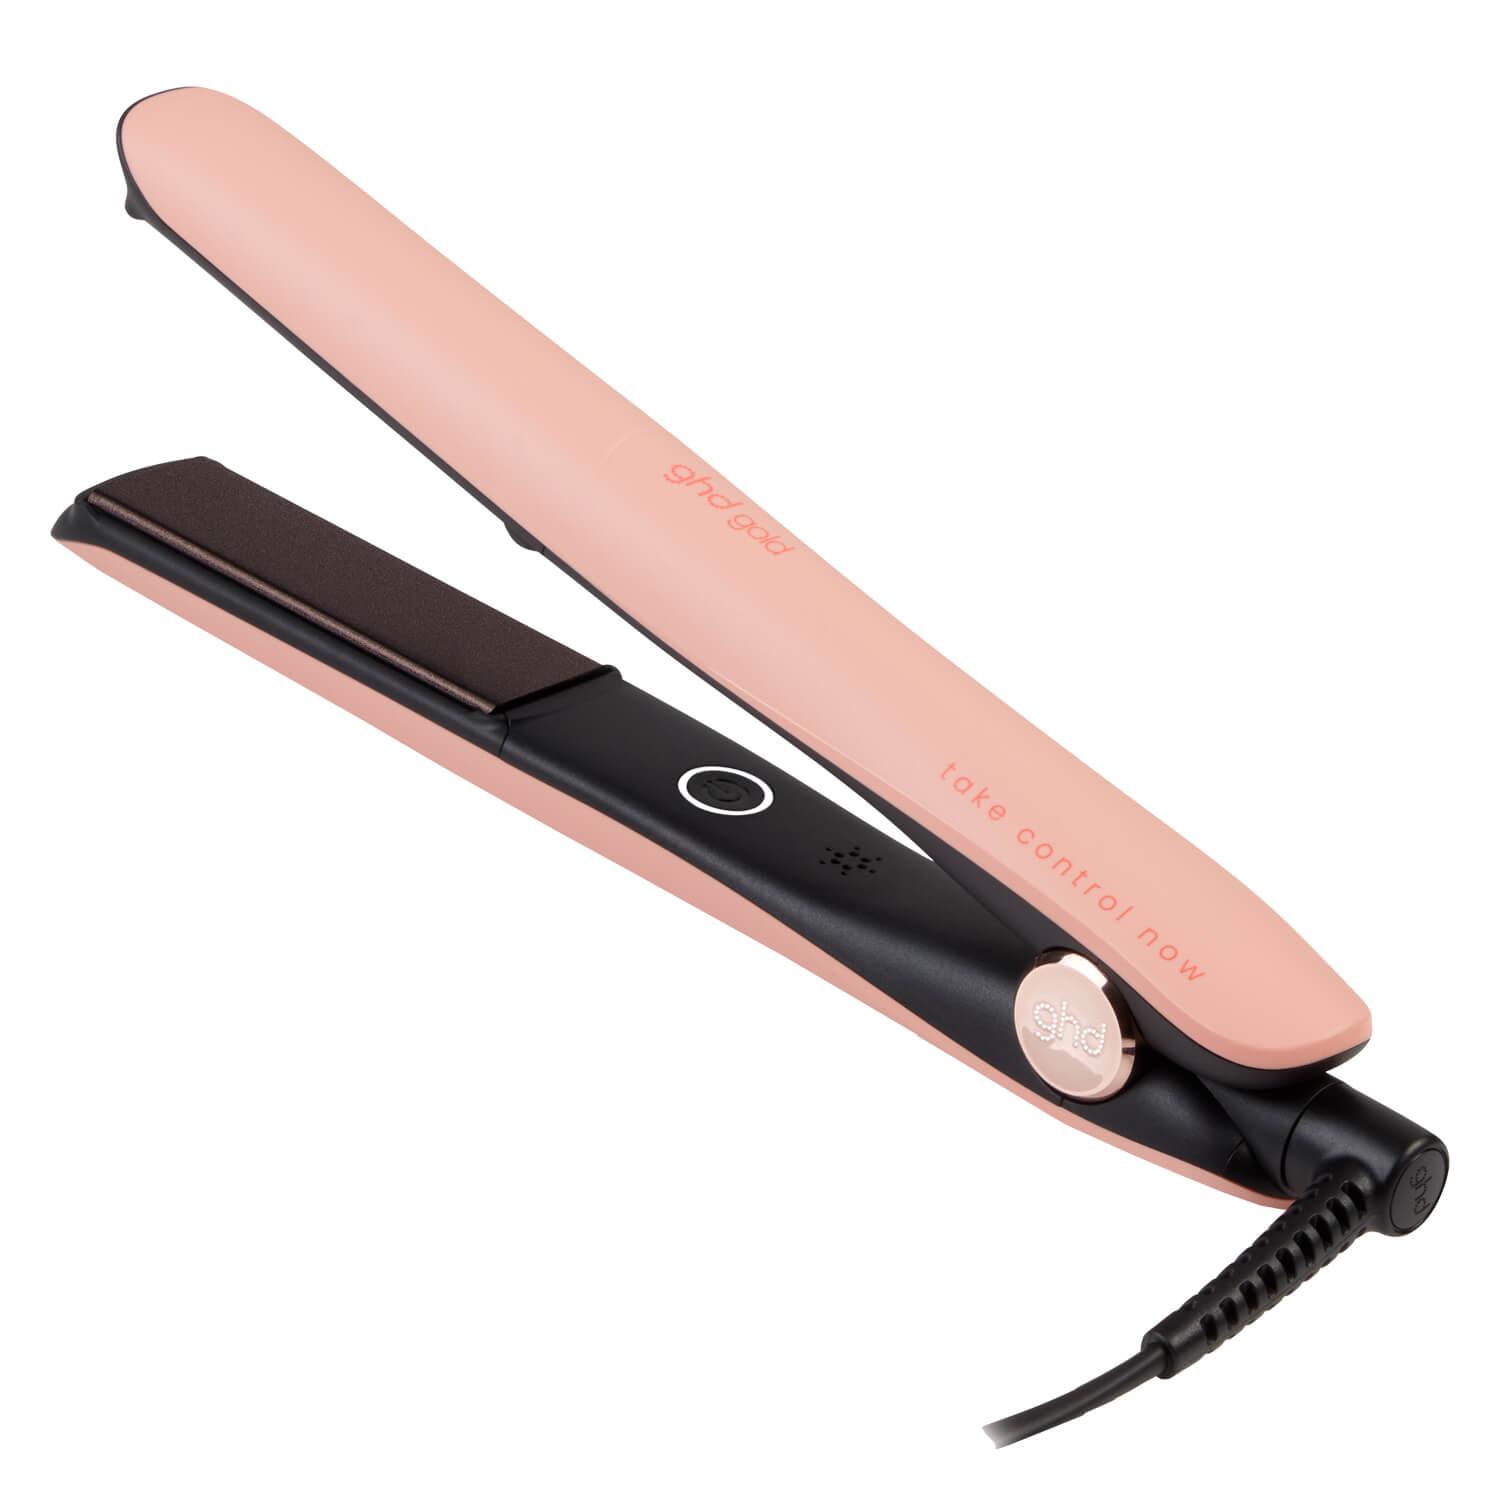 ghd Tools - Gold Classic Styler Pink Peach Charity Edition